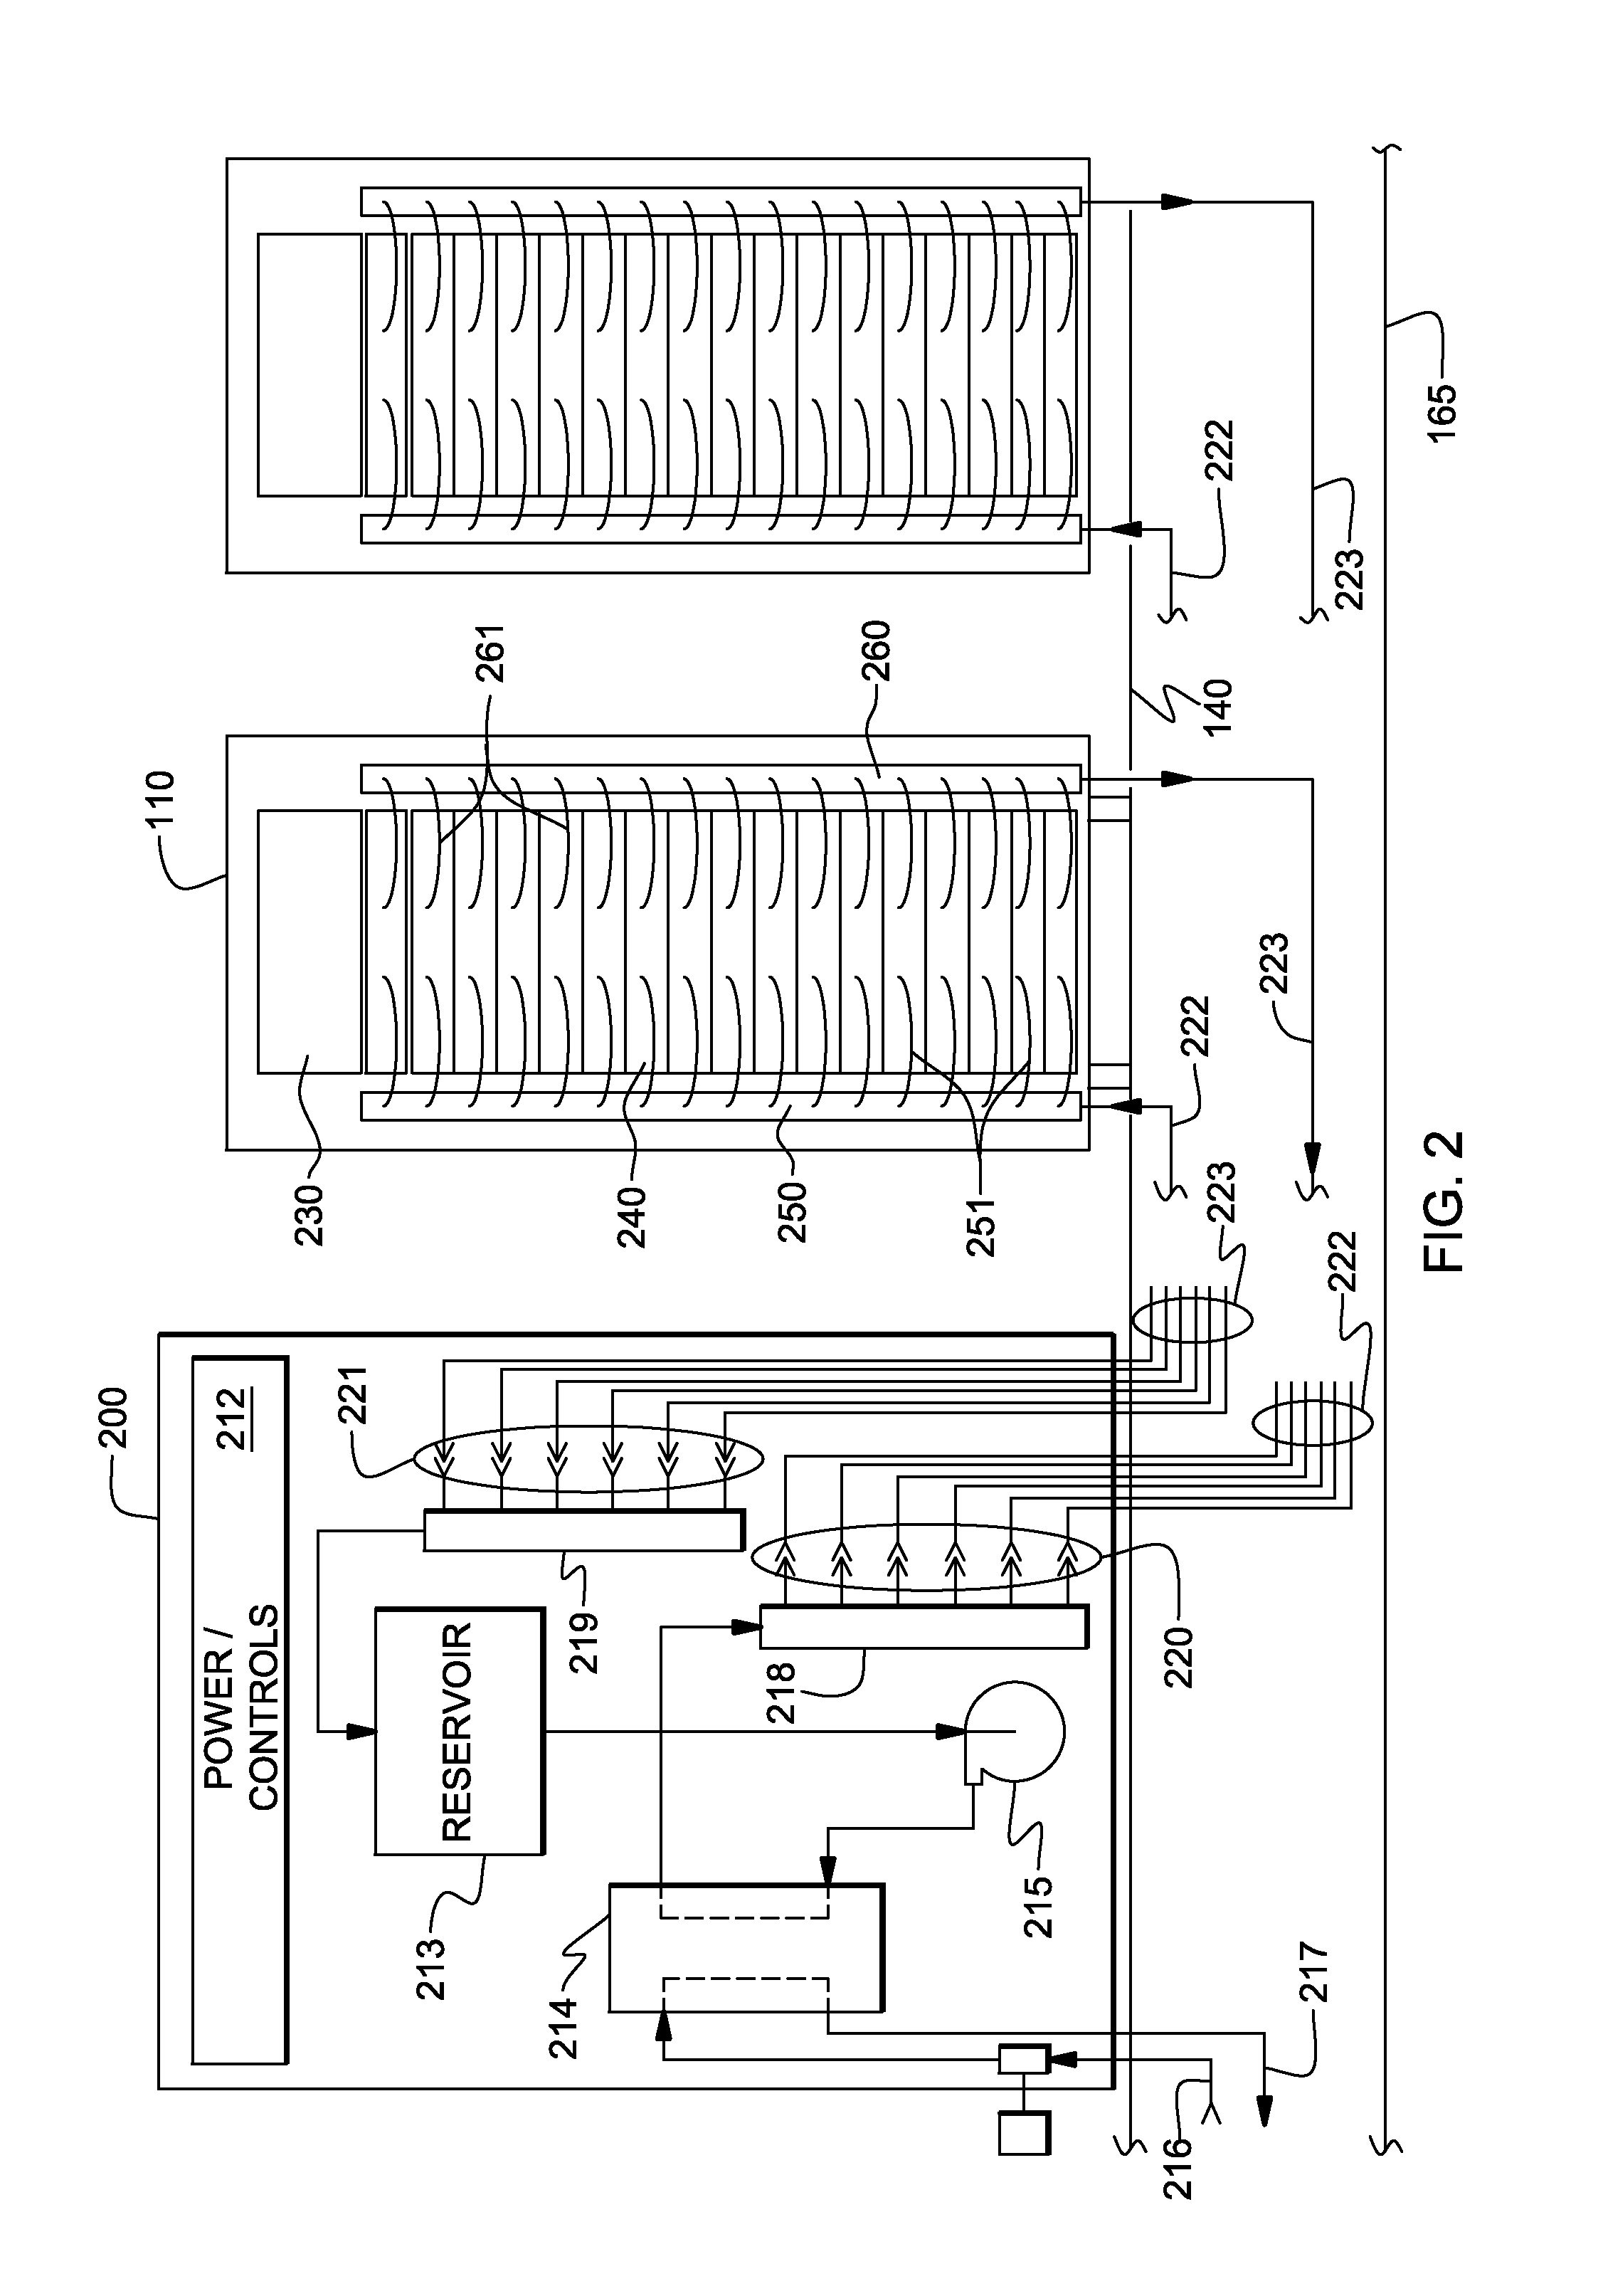 Apparatus and method with forced coolant vapor movement for facilitating two-phase cooling of an electronic device